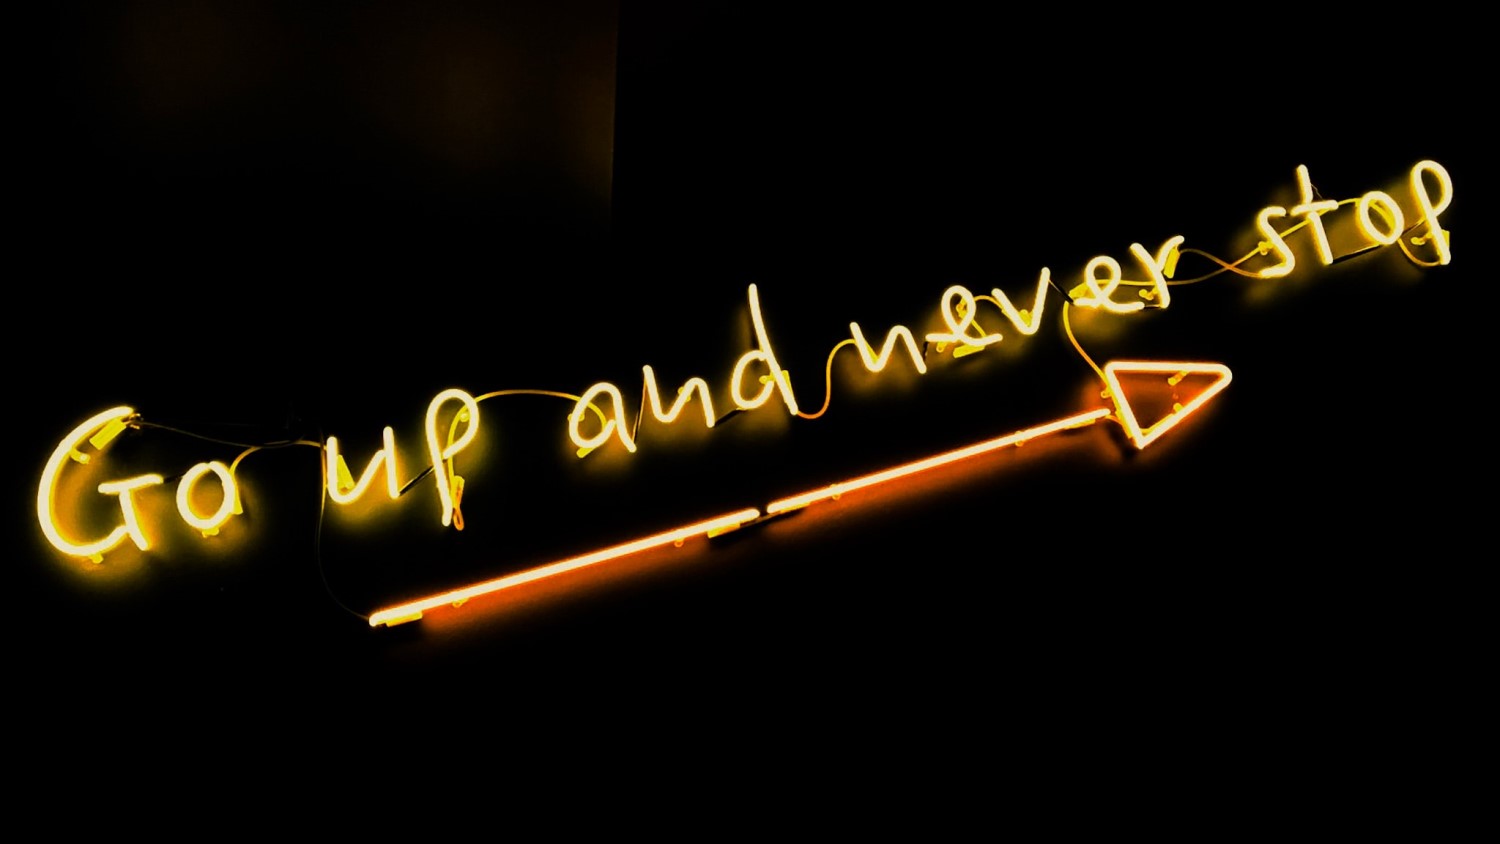 neon sign 'go up and never stop'